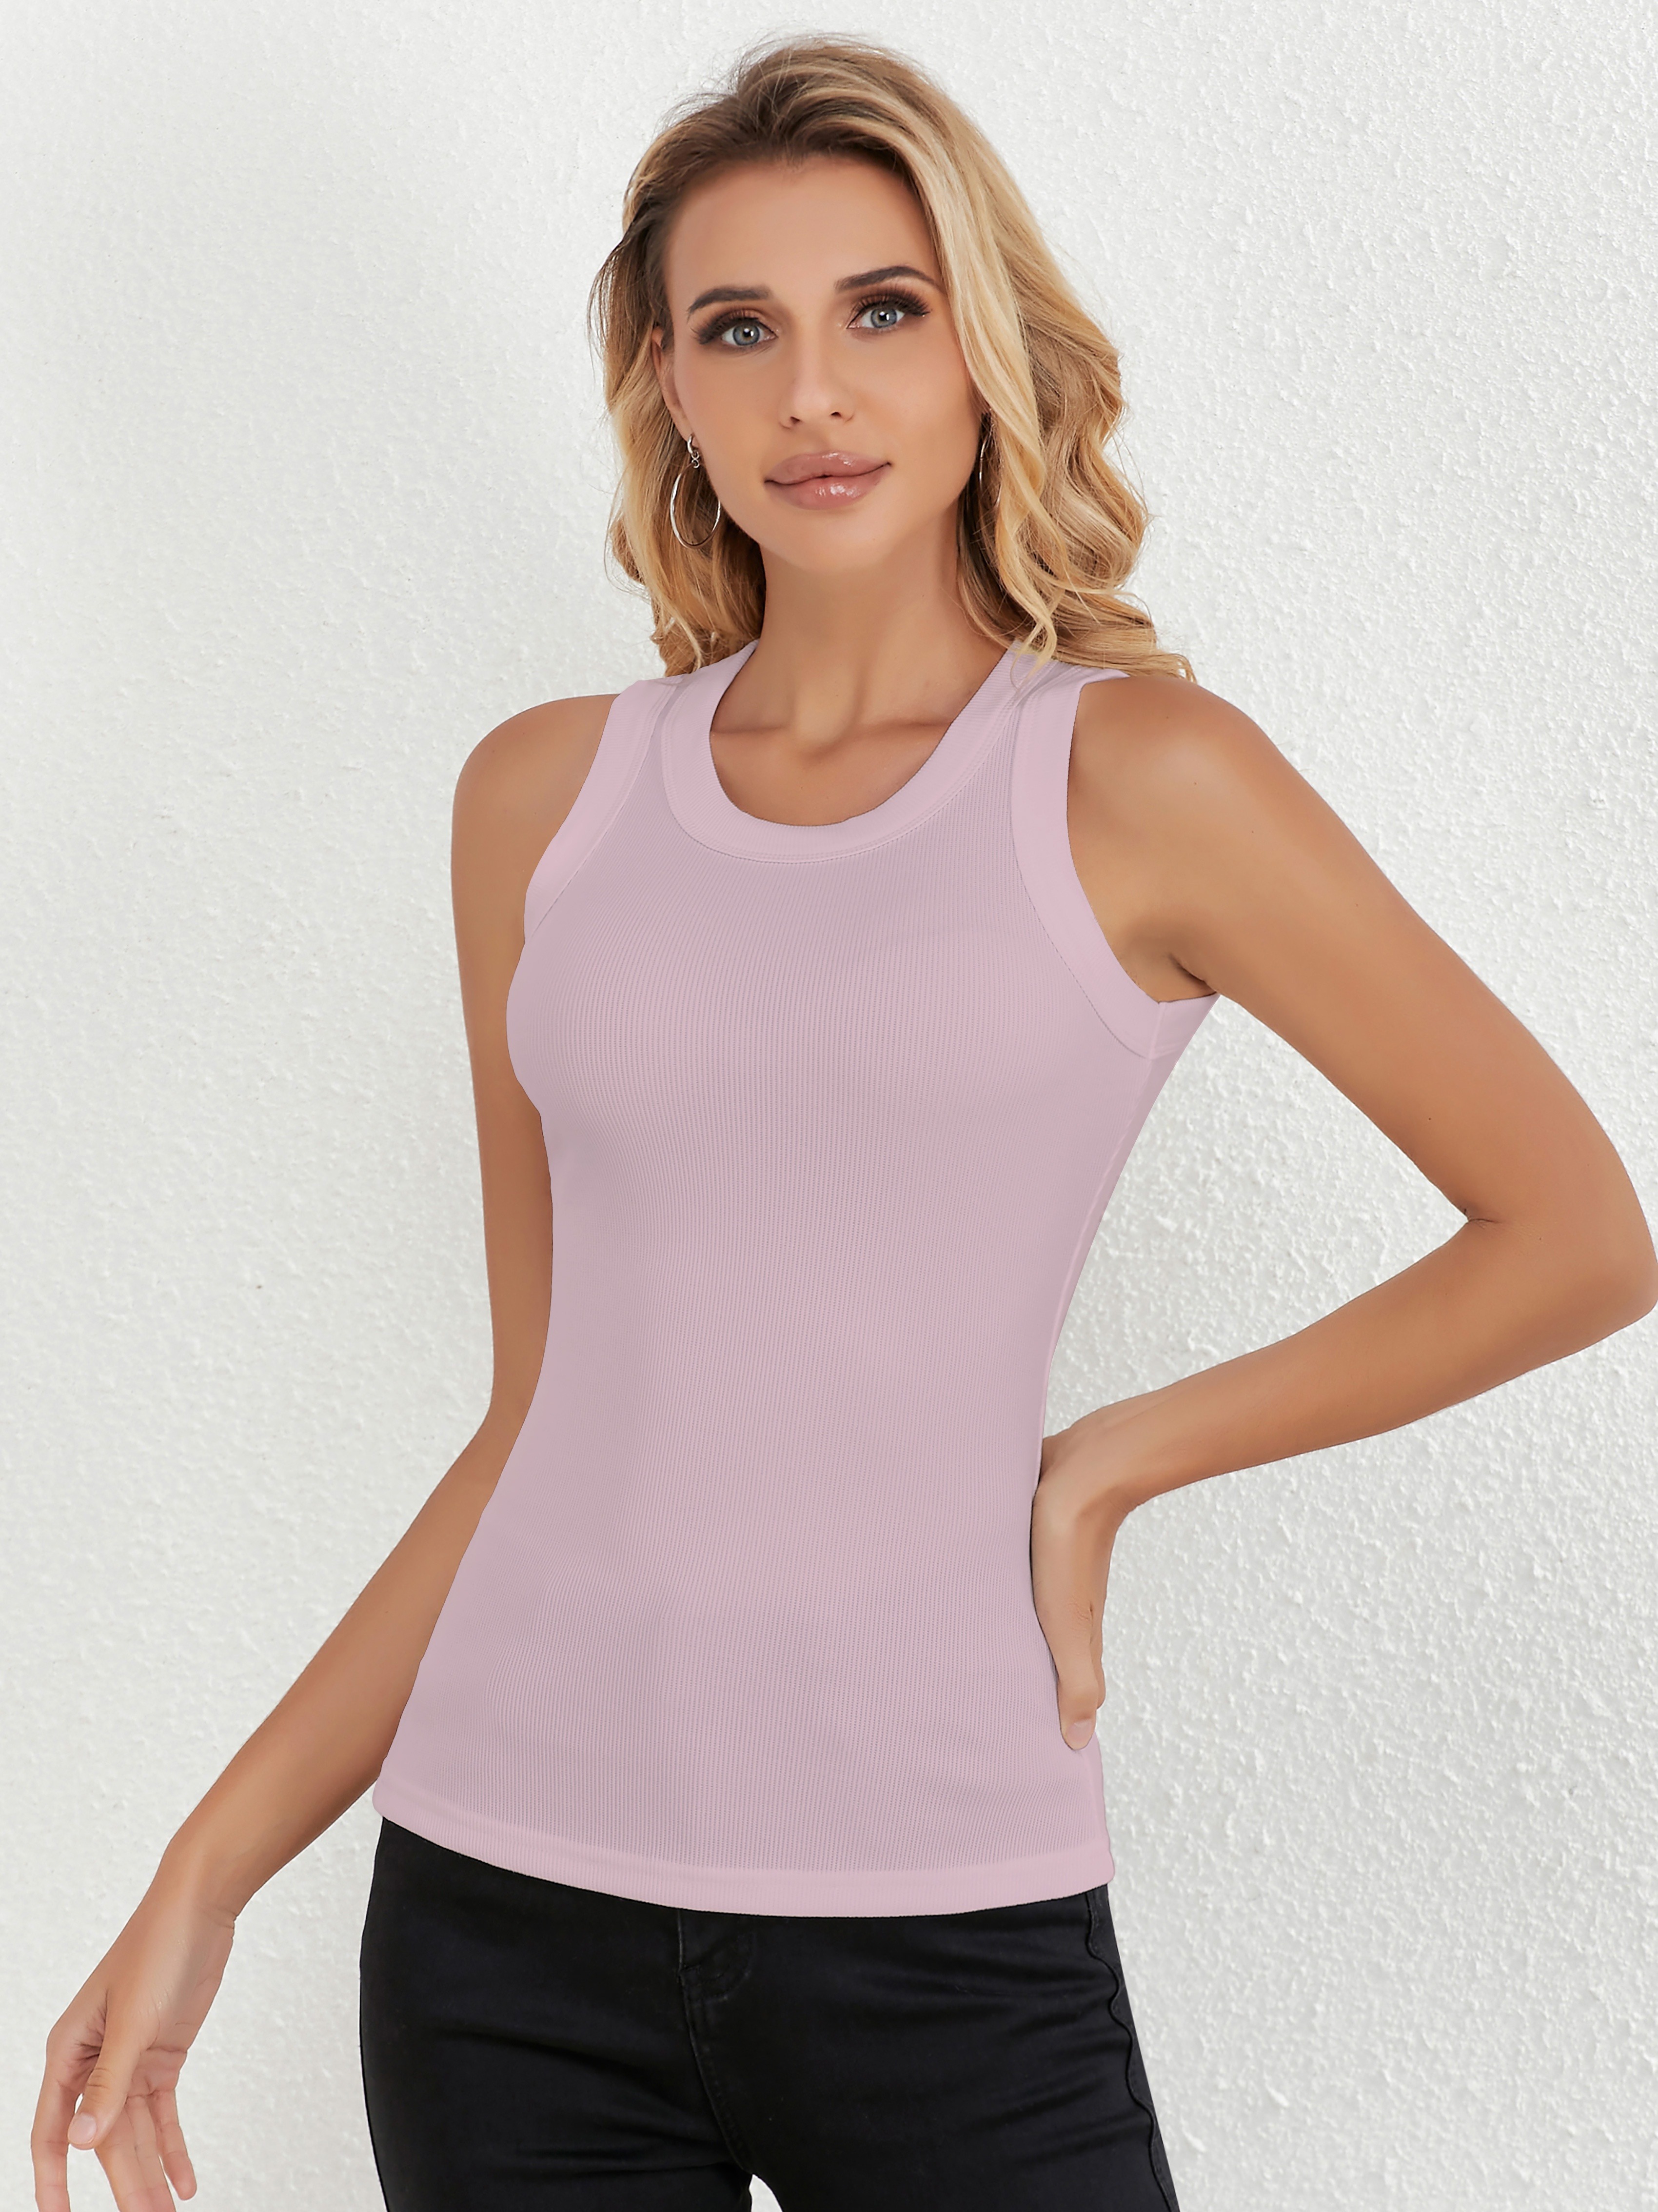 Summer Savings Clearance 2023! Camisole for Women Summer Color